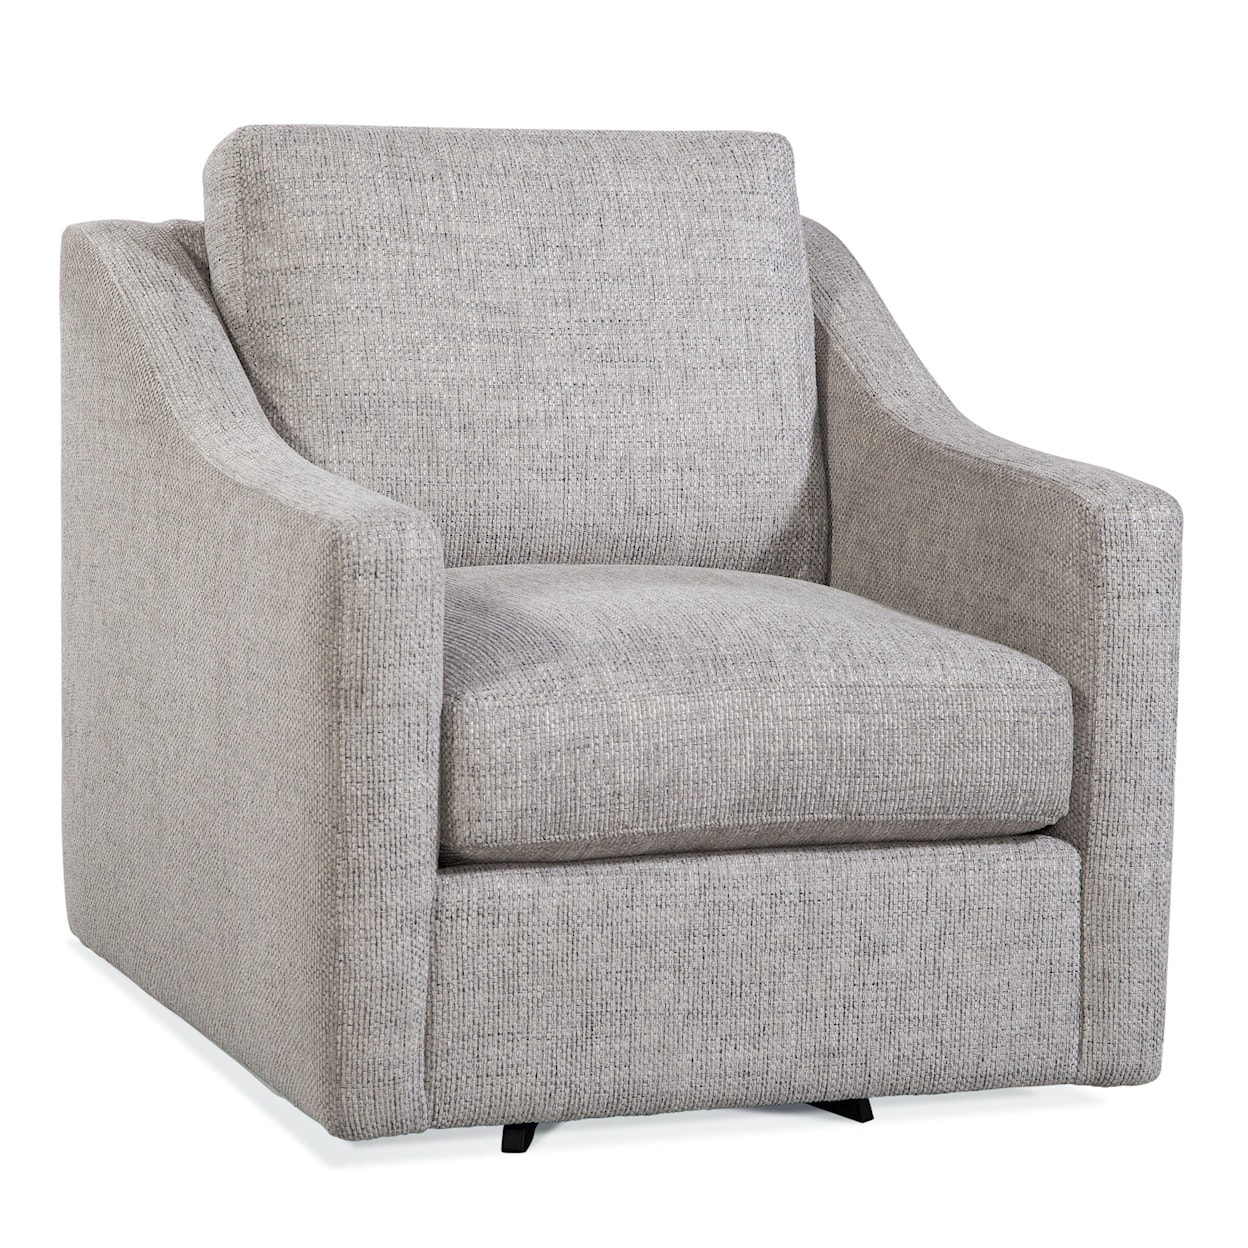 Braxton Culler Oliver Swivel Chair